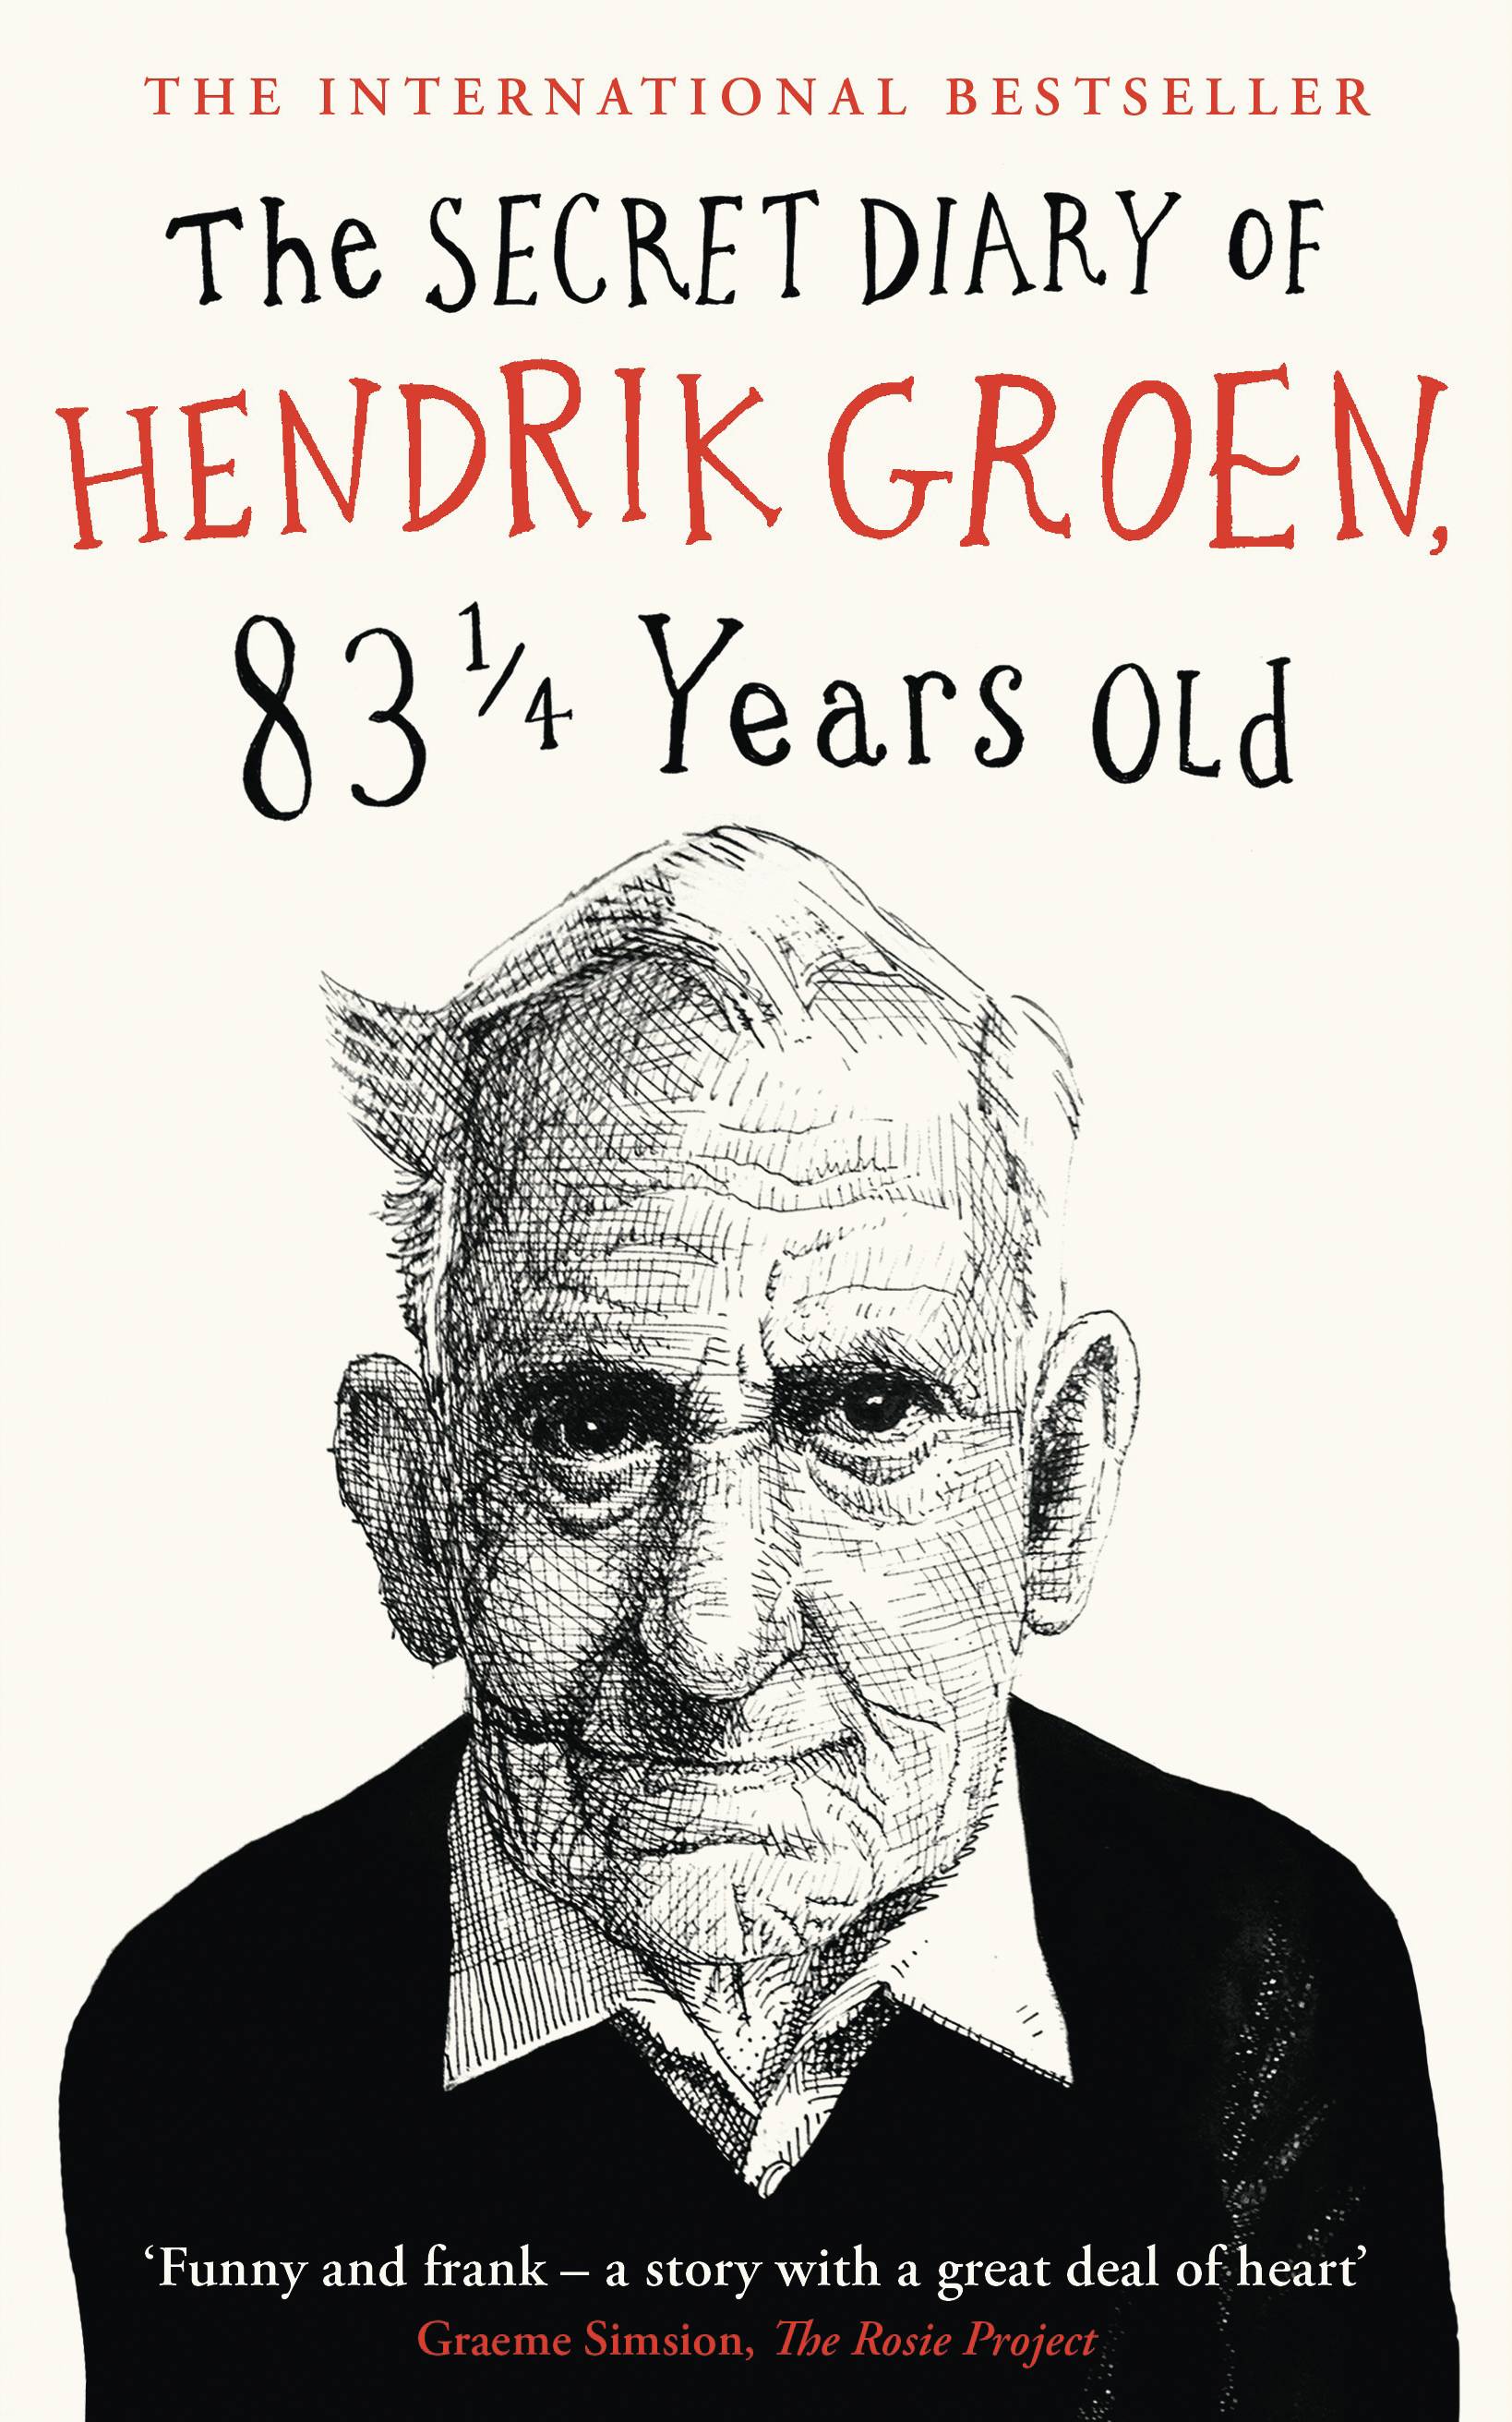 The Secret Diary of Hendrik Groen 83 1/2 years old review